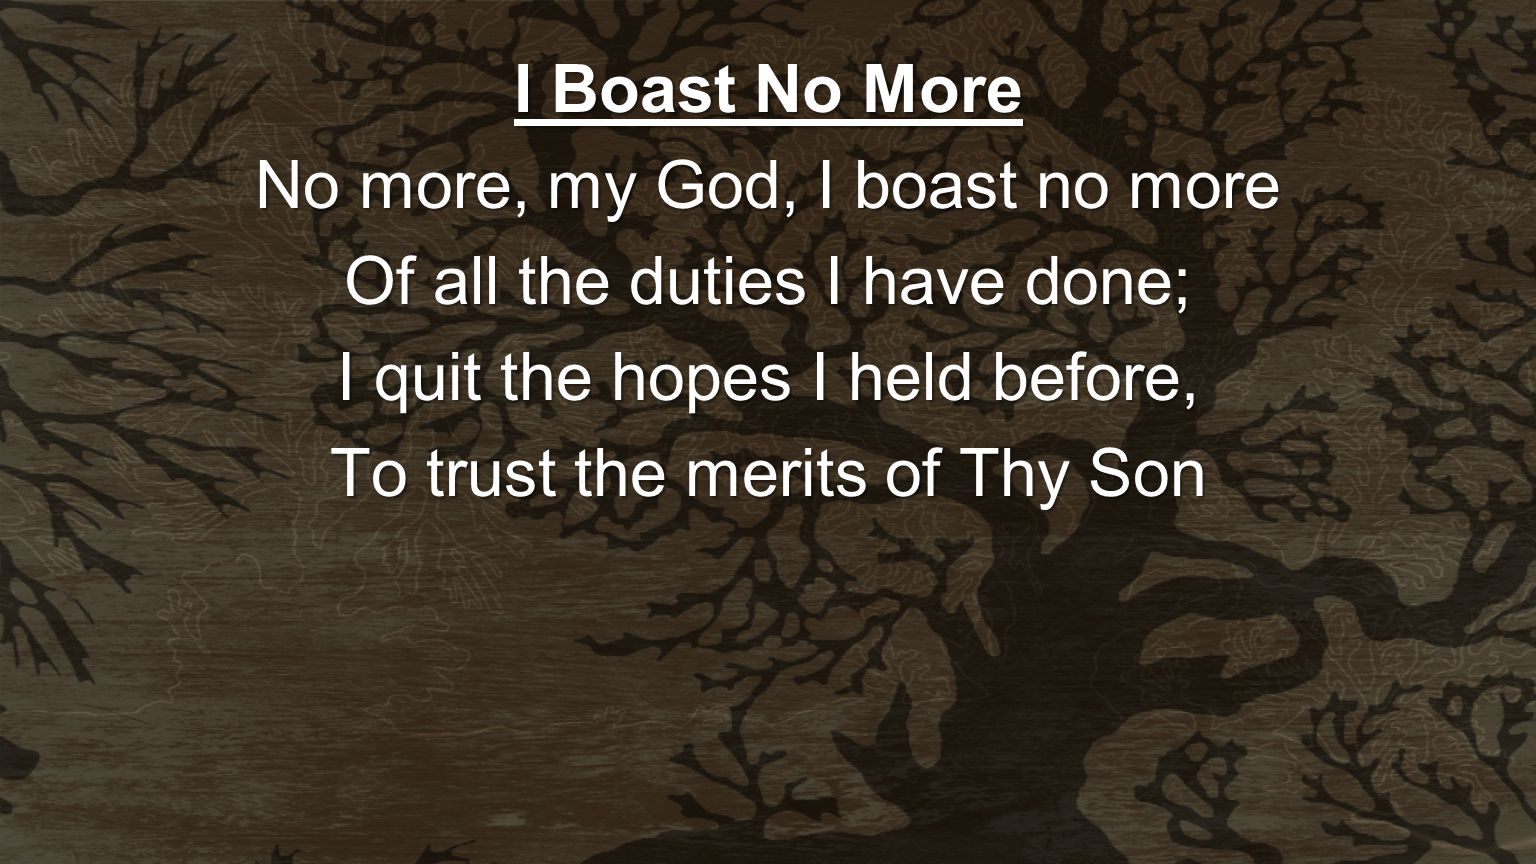 No more, my God, I boast no more Of all the duties I have done;